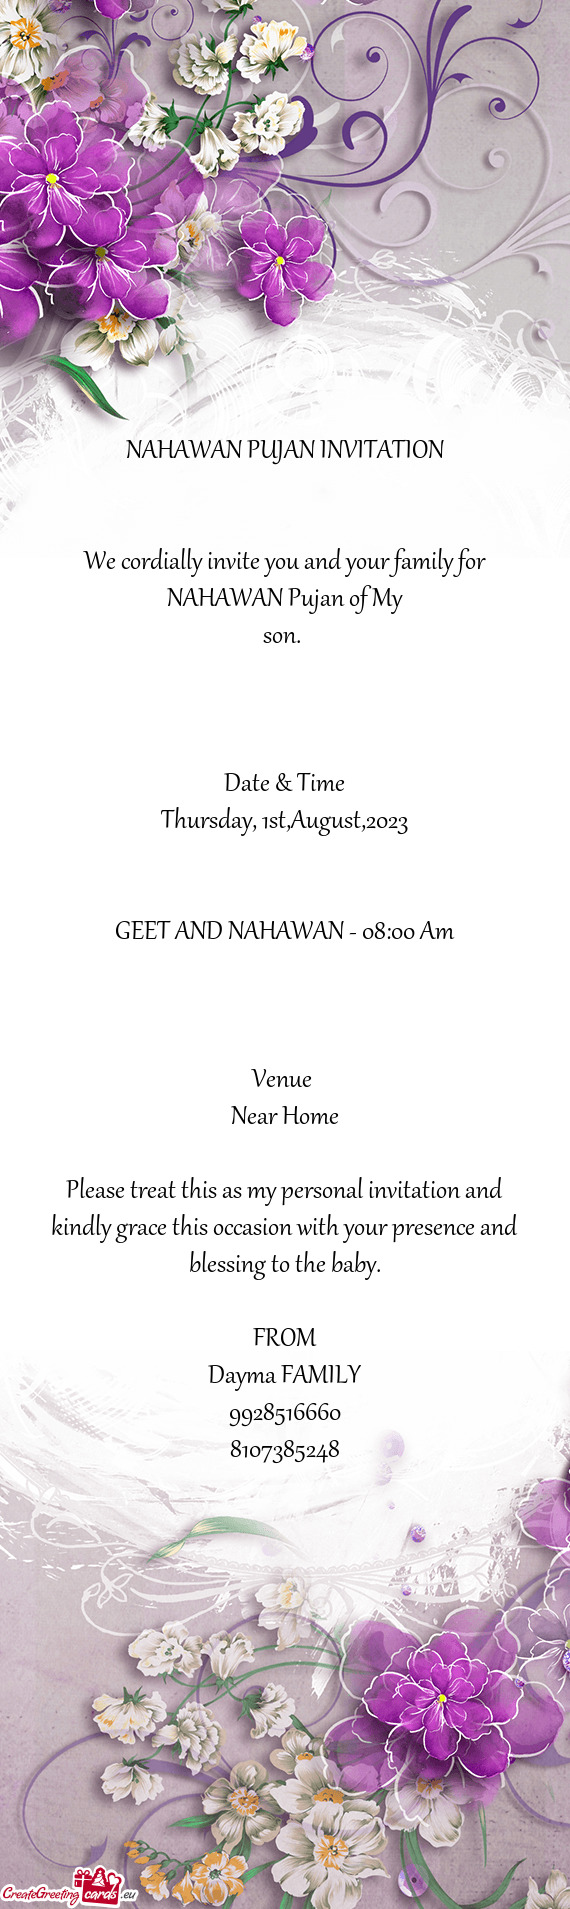 We cordially invite you and your family for NAHAWAN Pujan of My